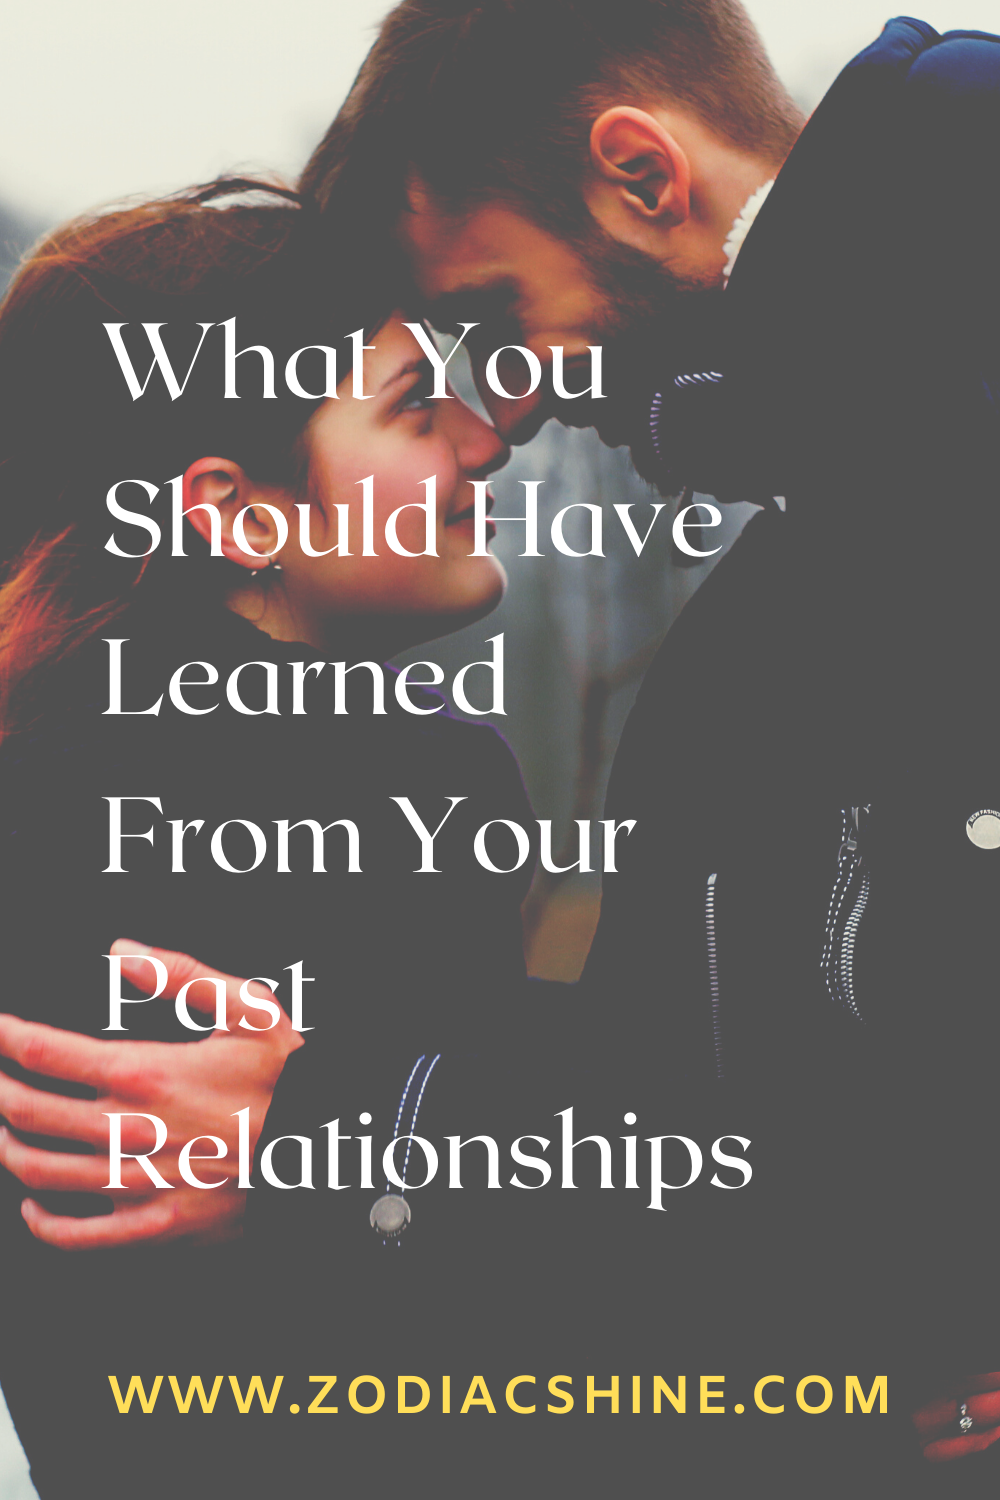 What You Should Have Learned From Your Past Relationships